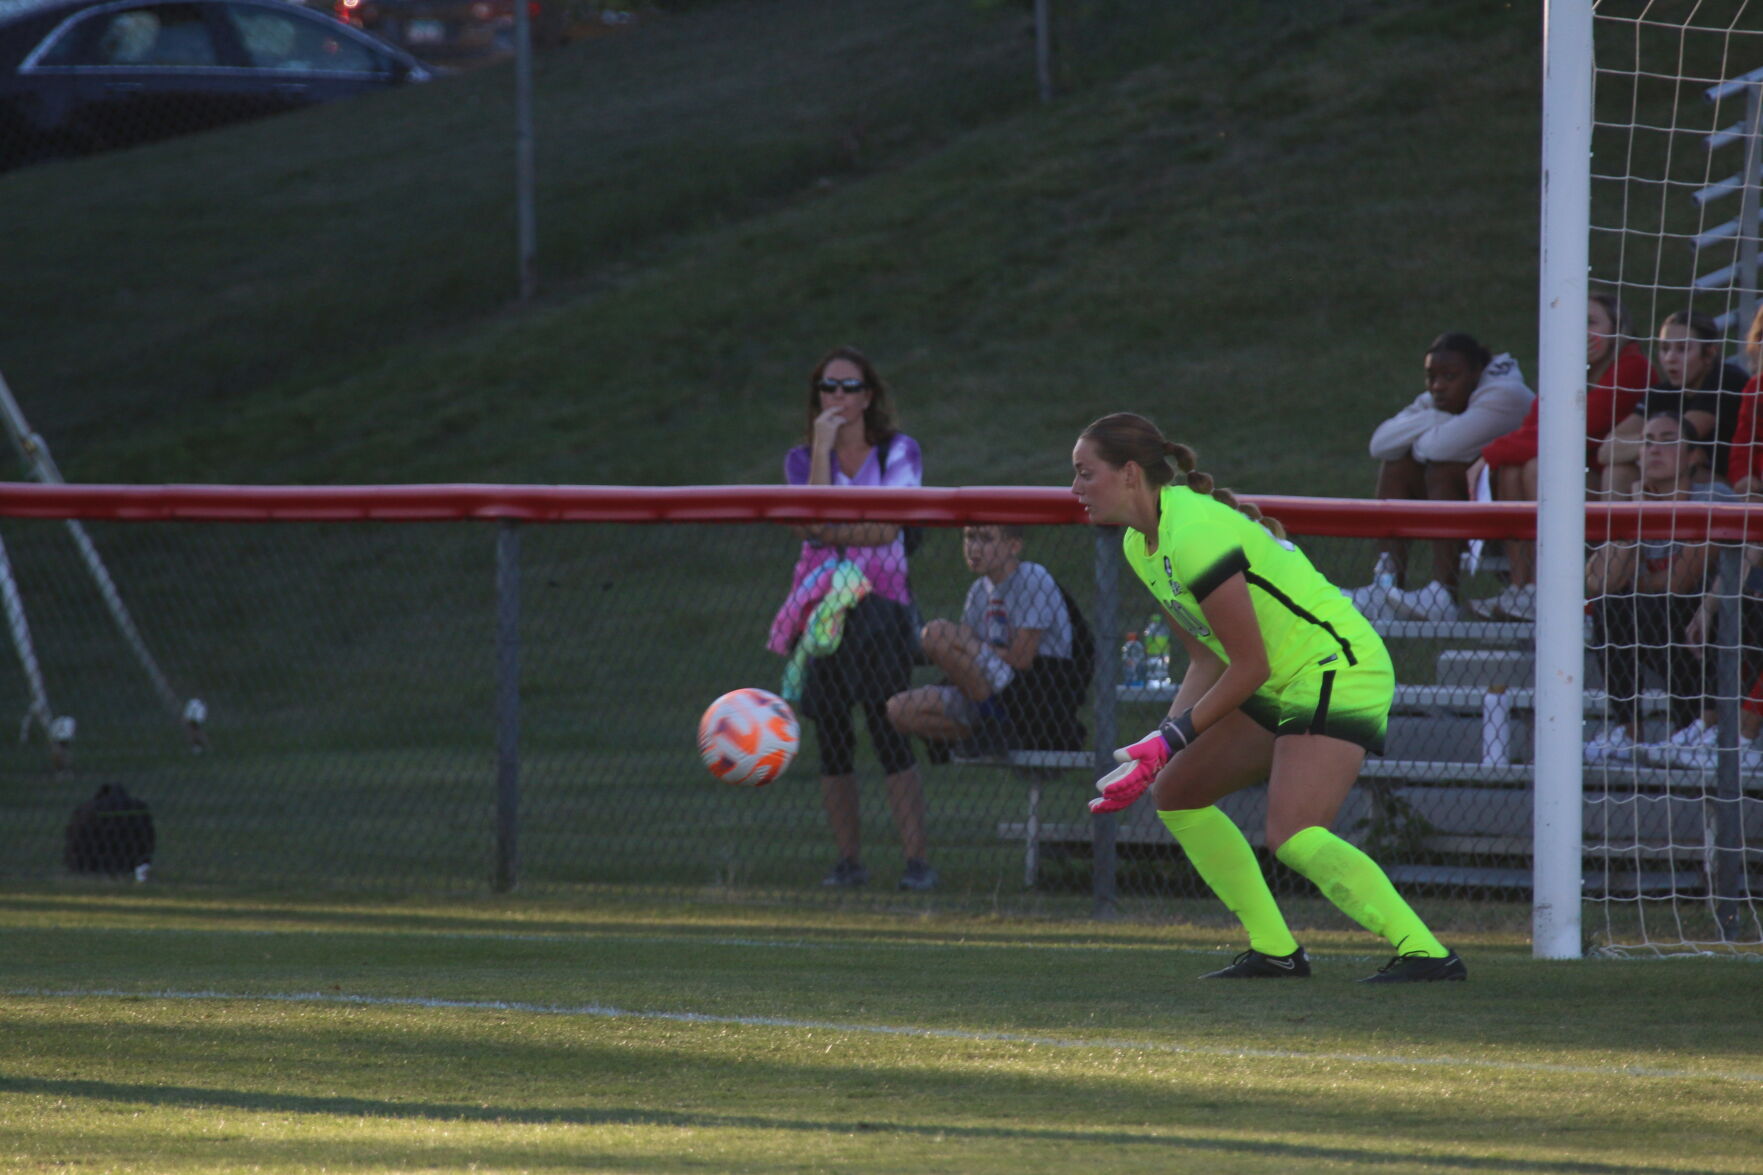 Glovers historic day leads the way in ISU soccers 4-1 win over Western Illinois Sports videtteonline photo